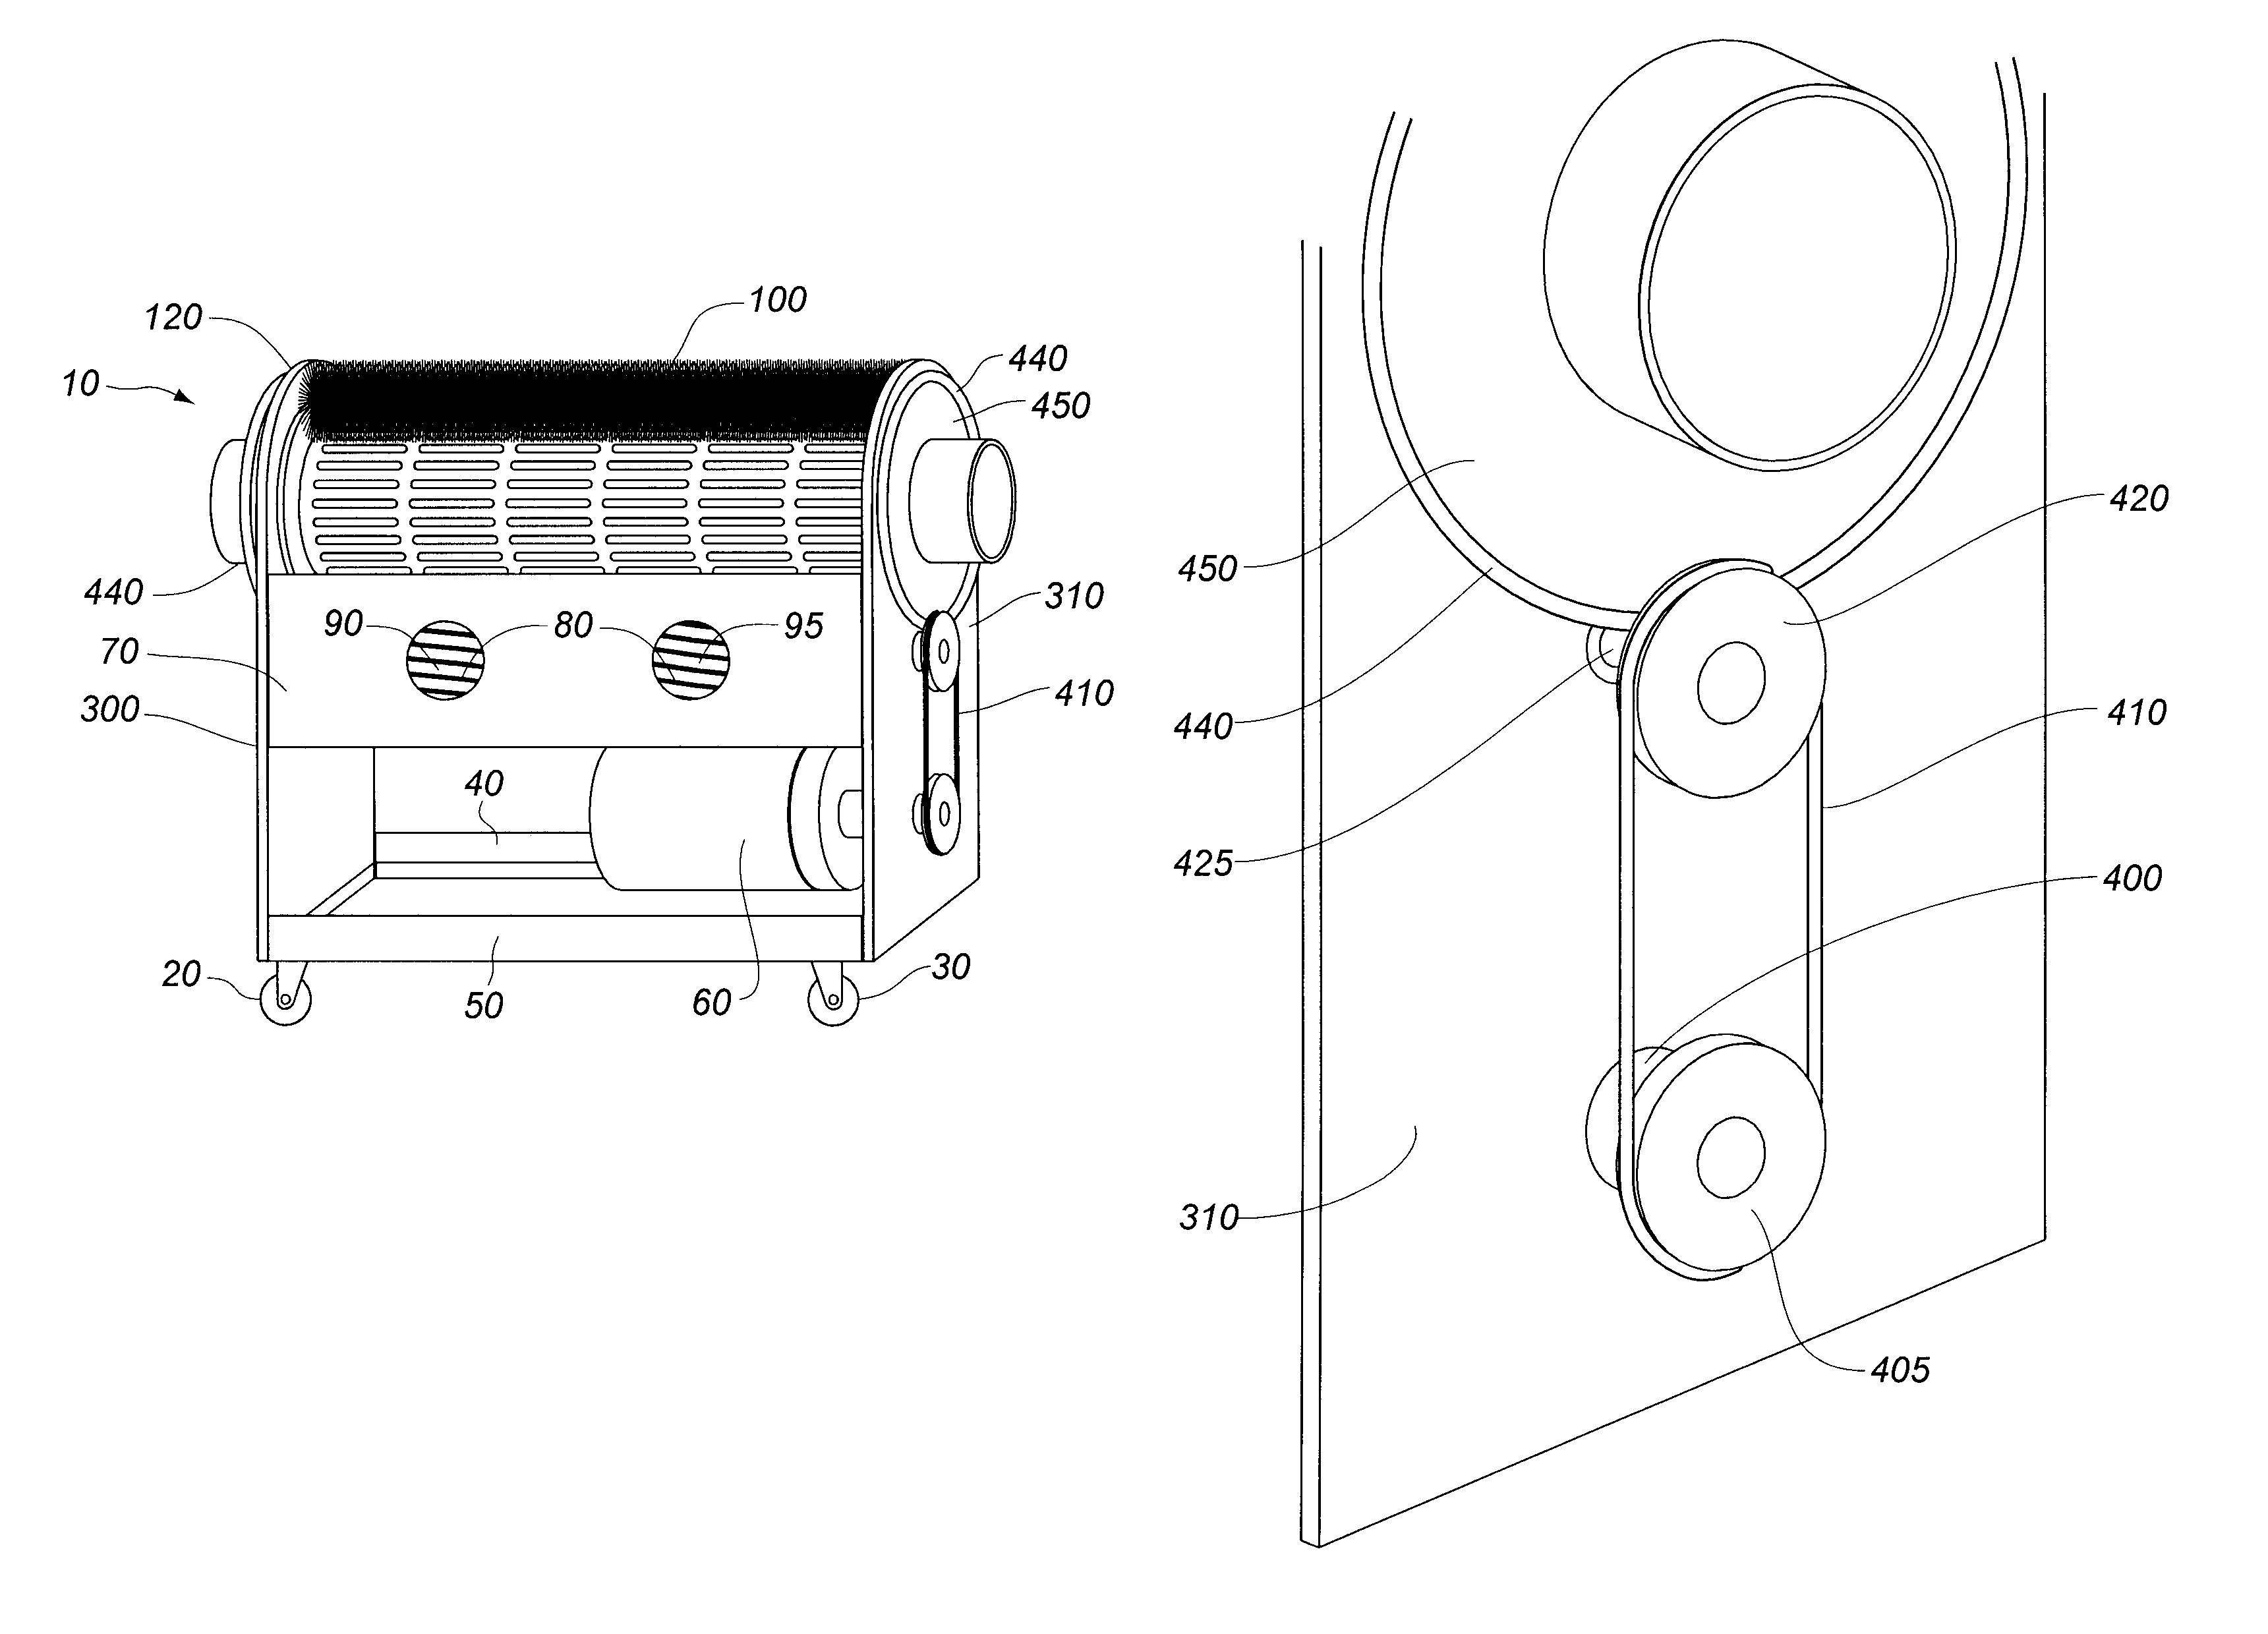 Plant processing system and method